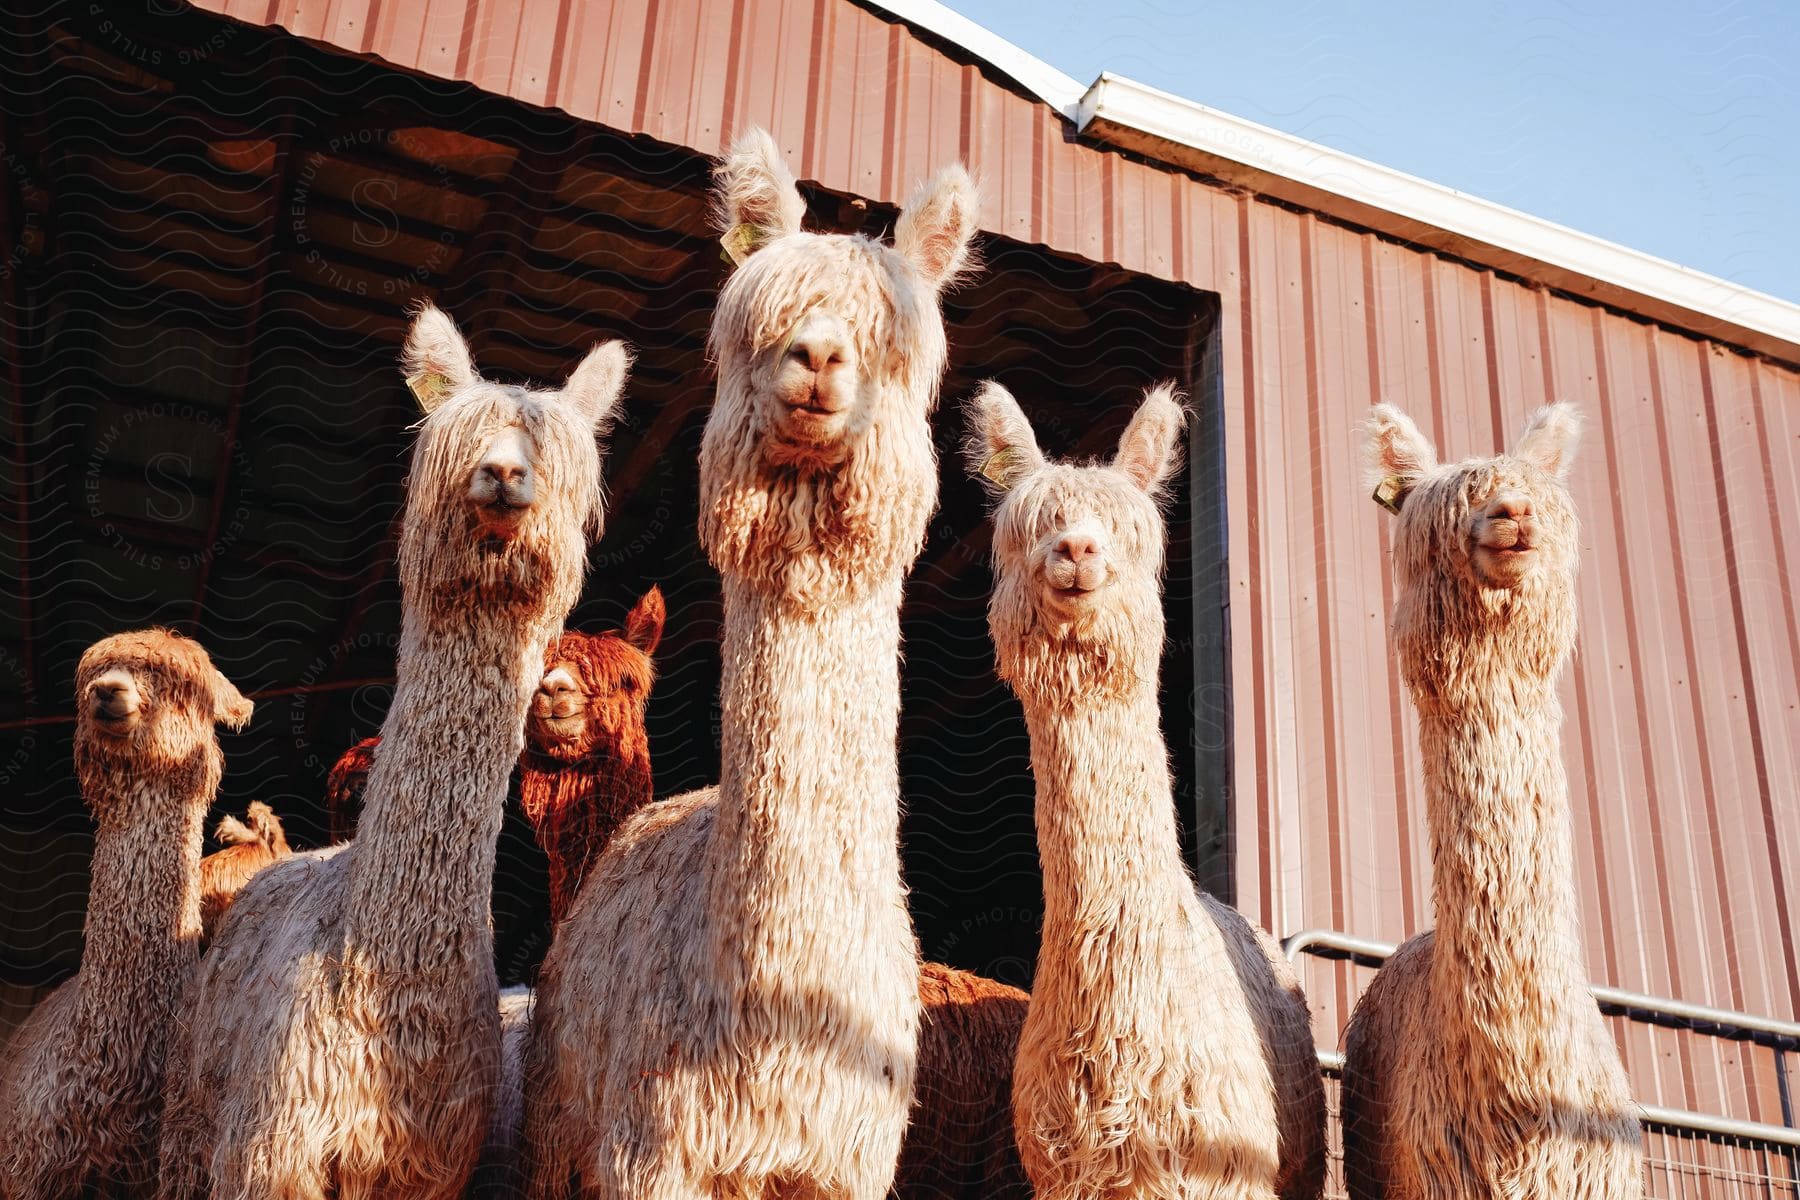 A group of llamas standing outside of a barn